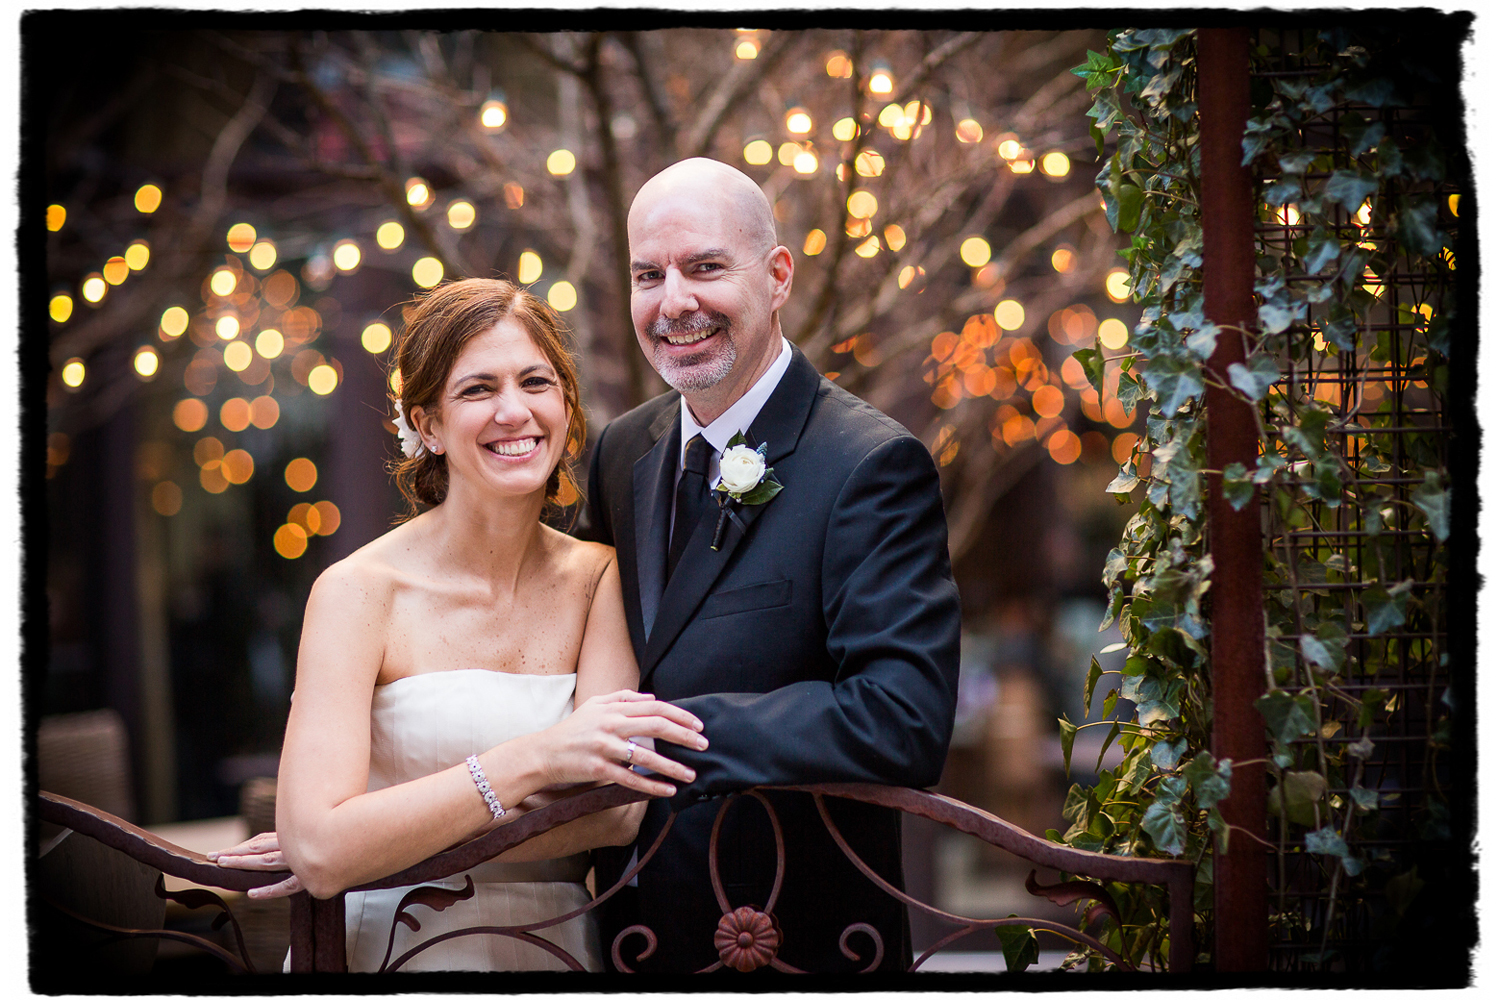 Chrissy & Tom at the courtyard of the Mondrian Hotel in SoHo before their Housing Works Wedding ceremony.